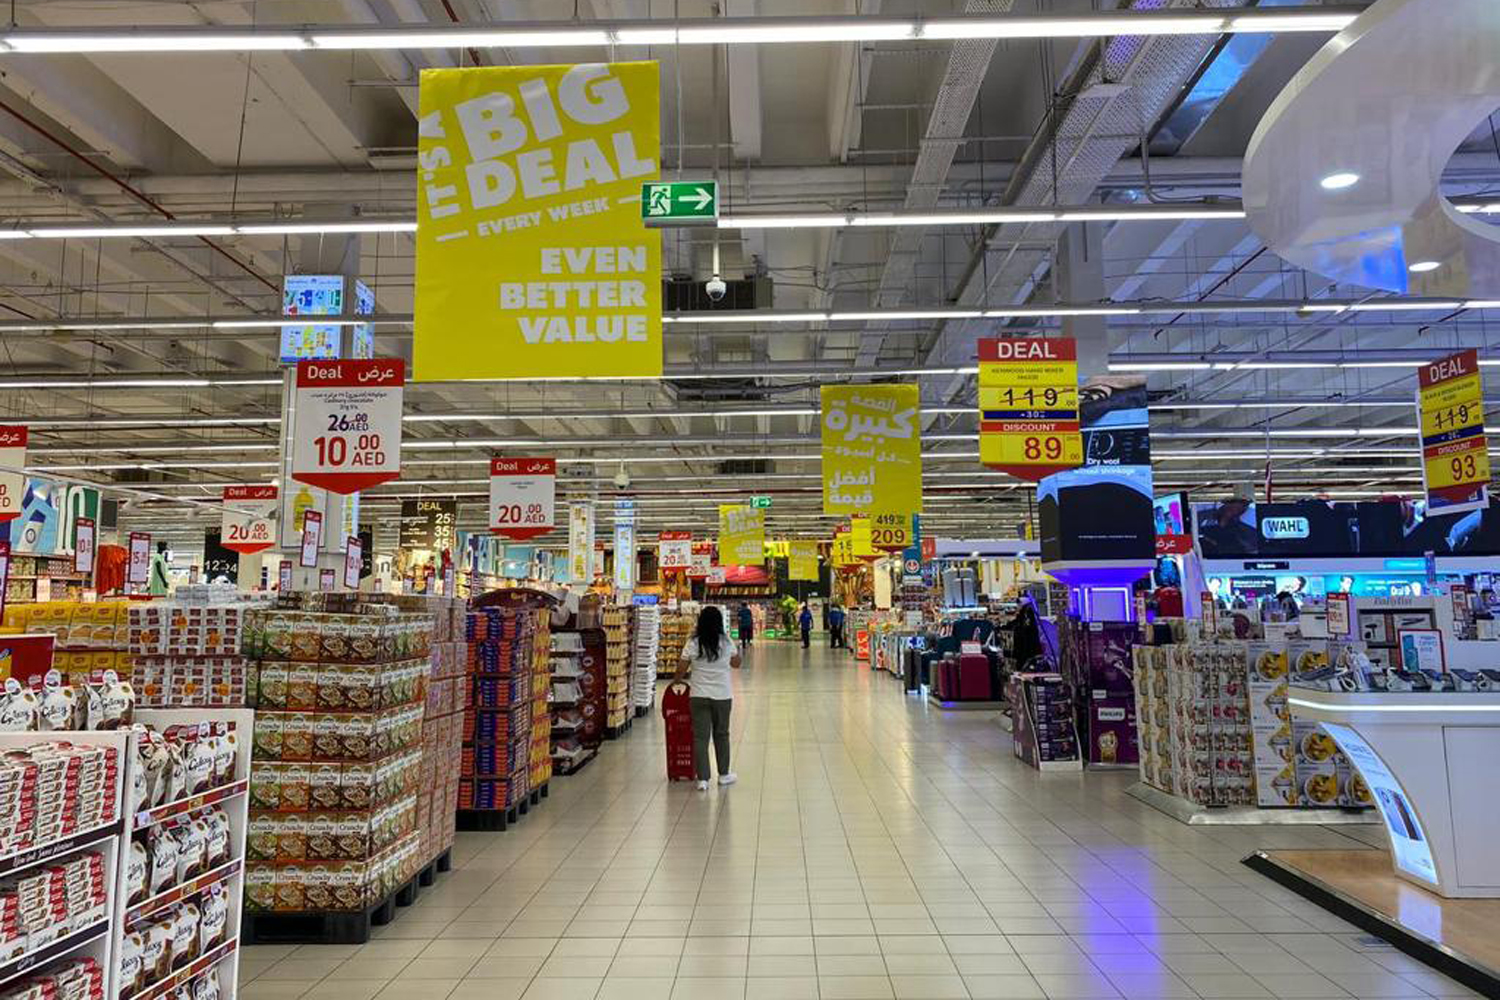 Carrefour launches the region's biggest ever promotion | Shopping